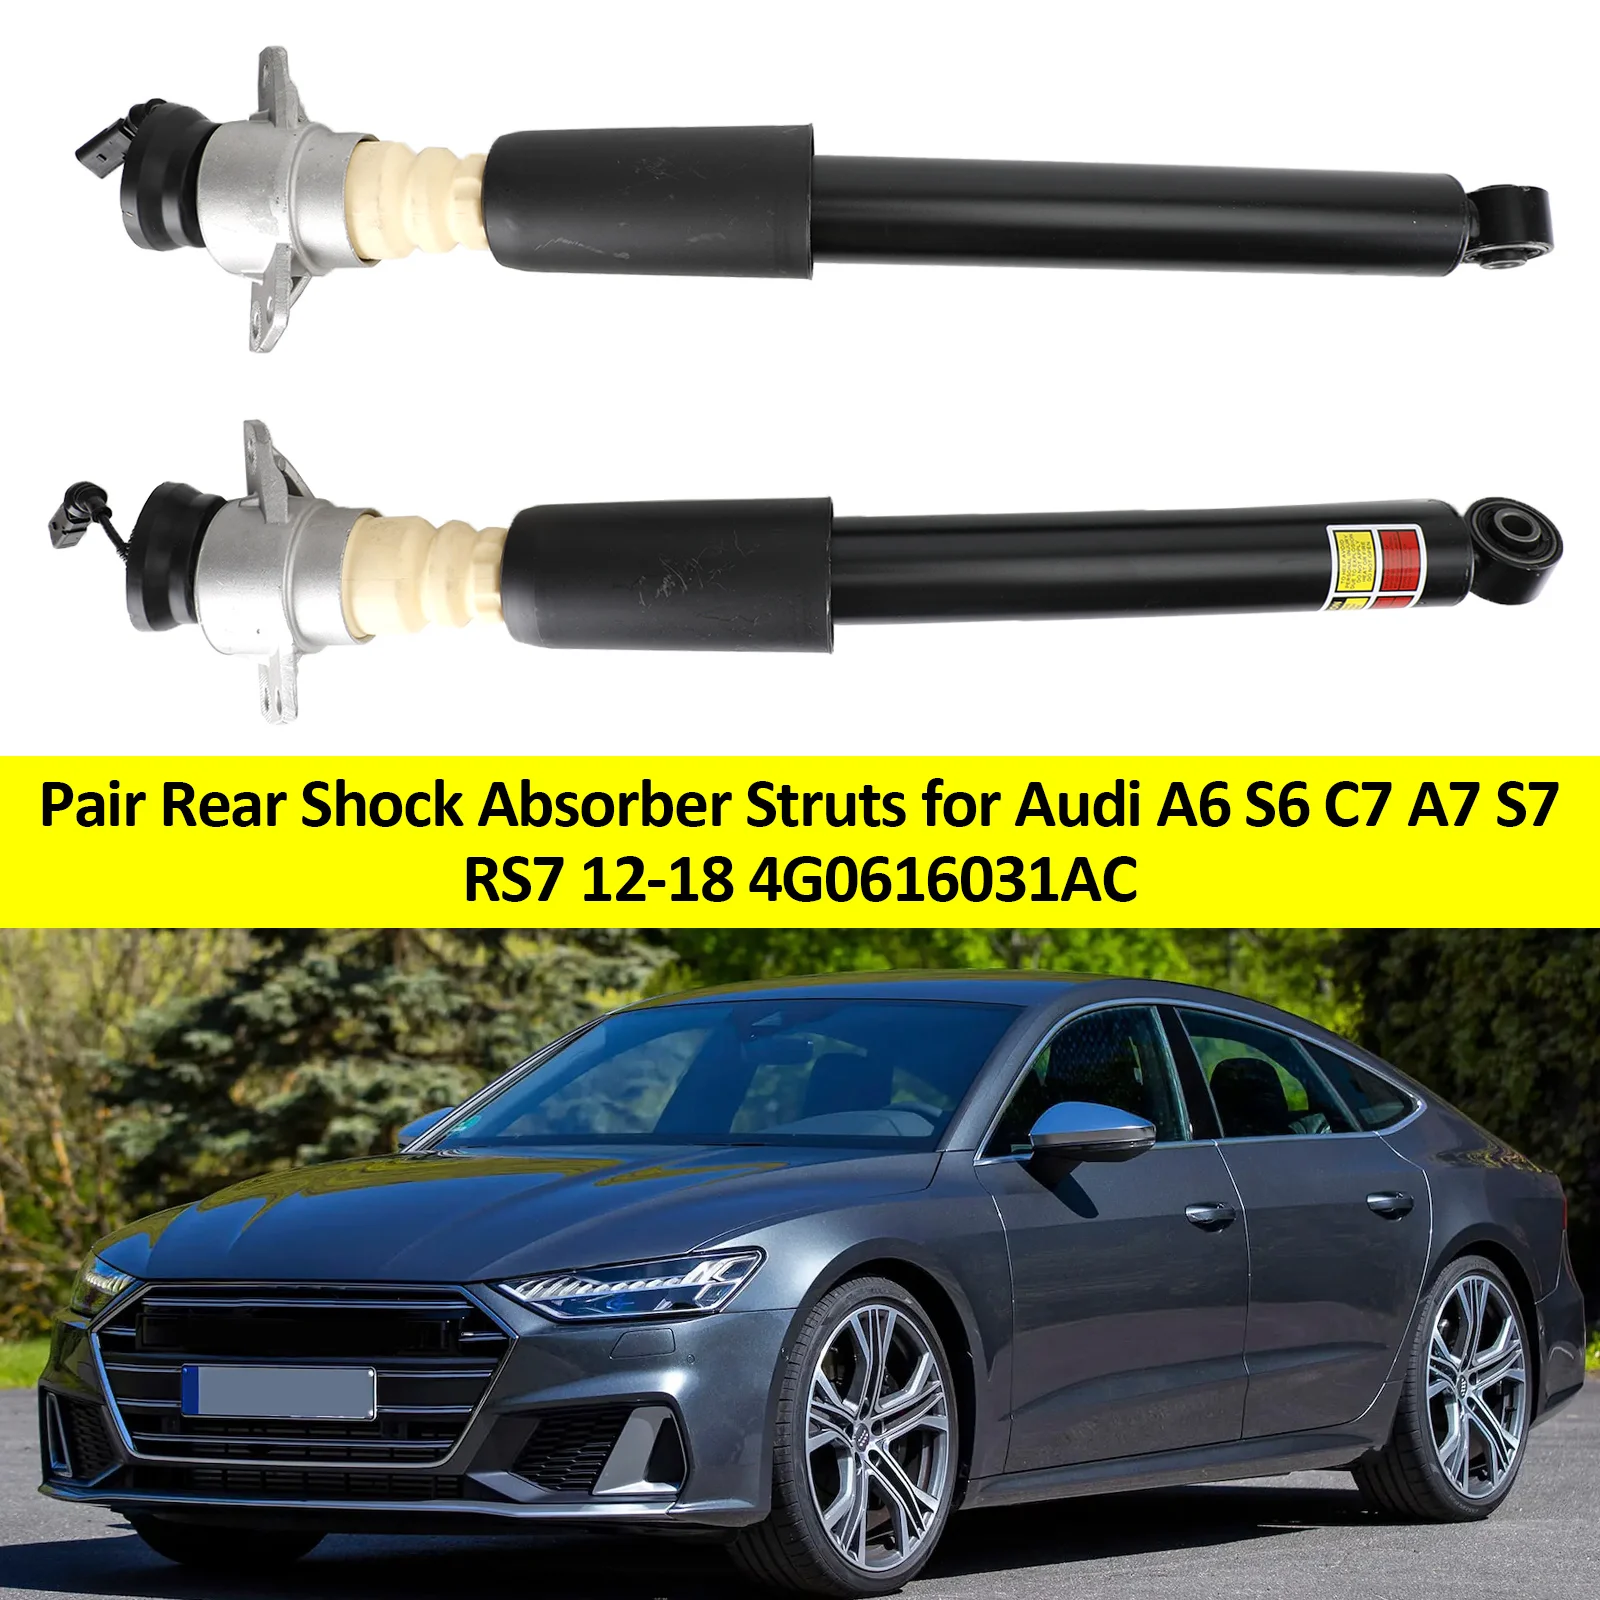 

Areyourshop Pair Rear Shock Absorber Struts for Audi A6 S6 C7 A7 S7 RS7 12-18 4G0616031AC